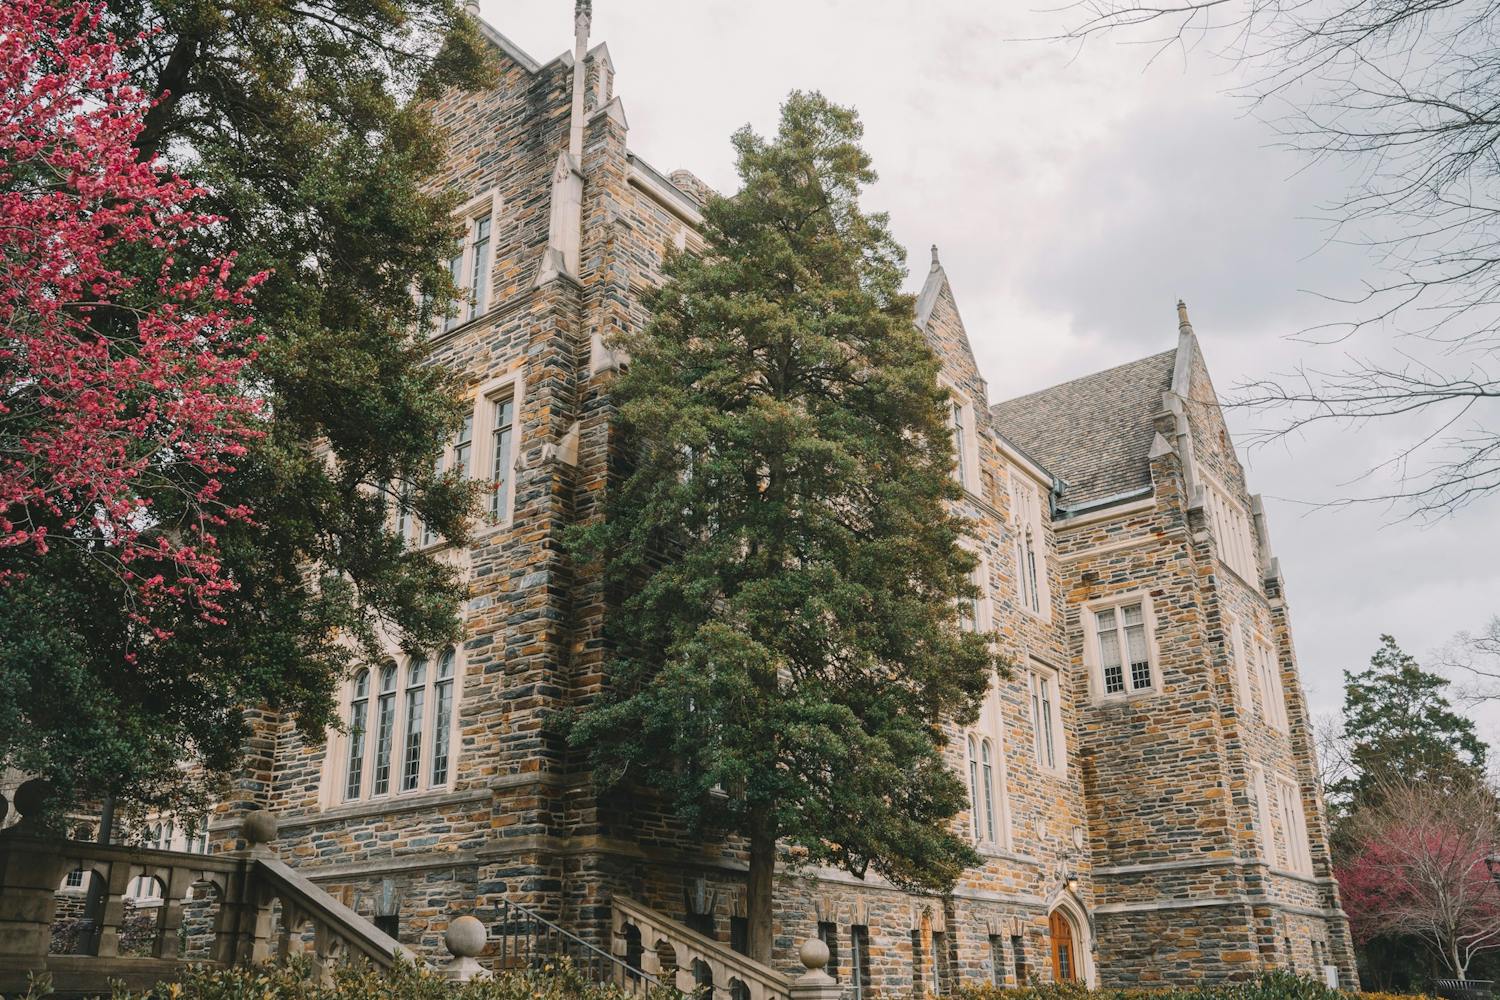 Black history in Duke's campus and architecture